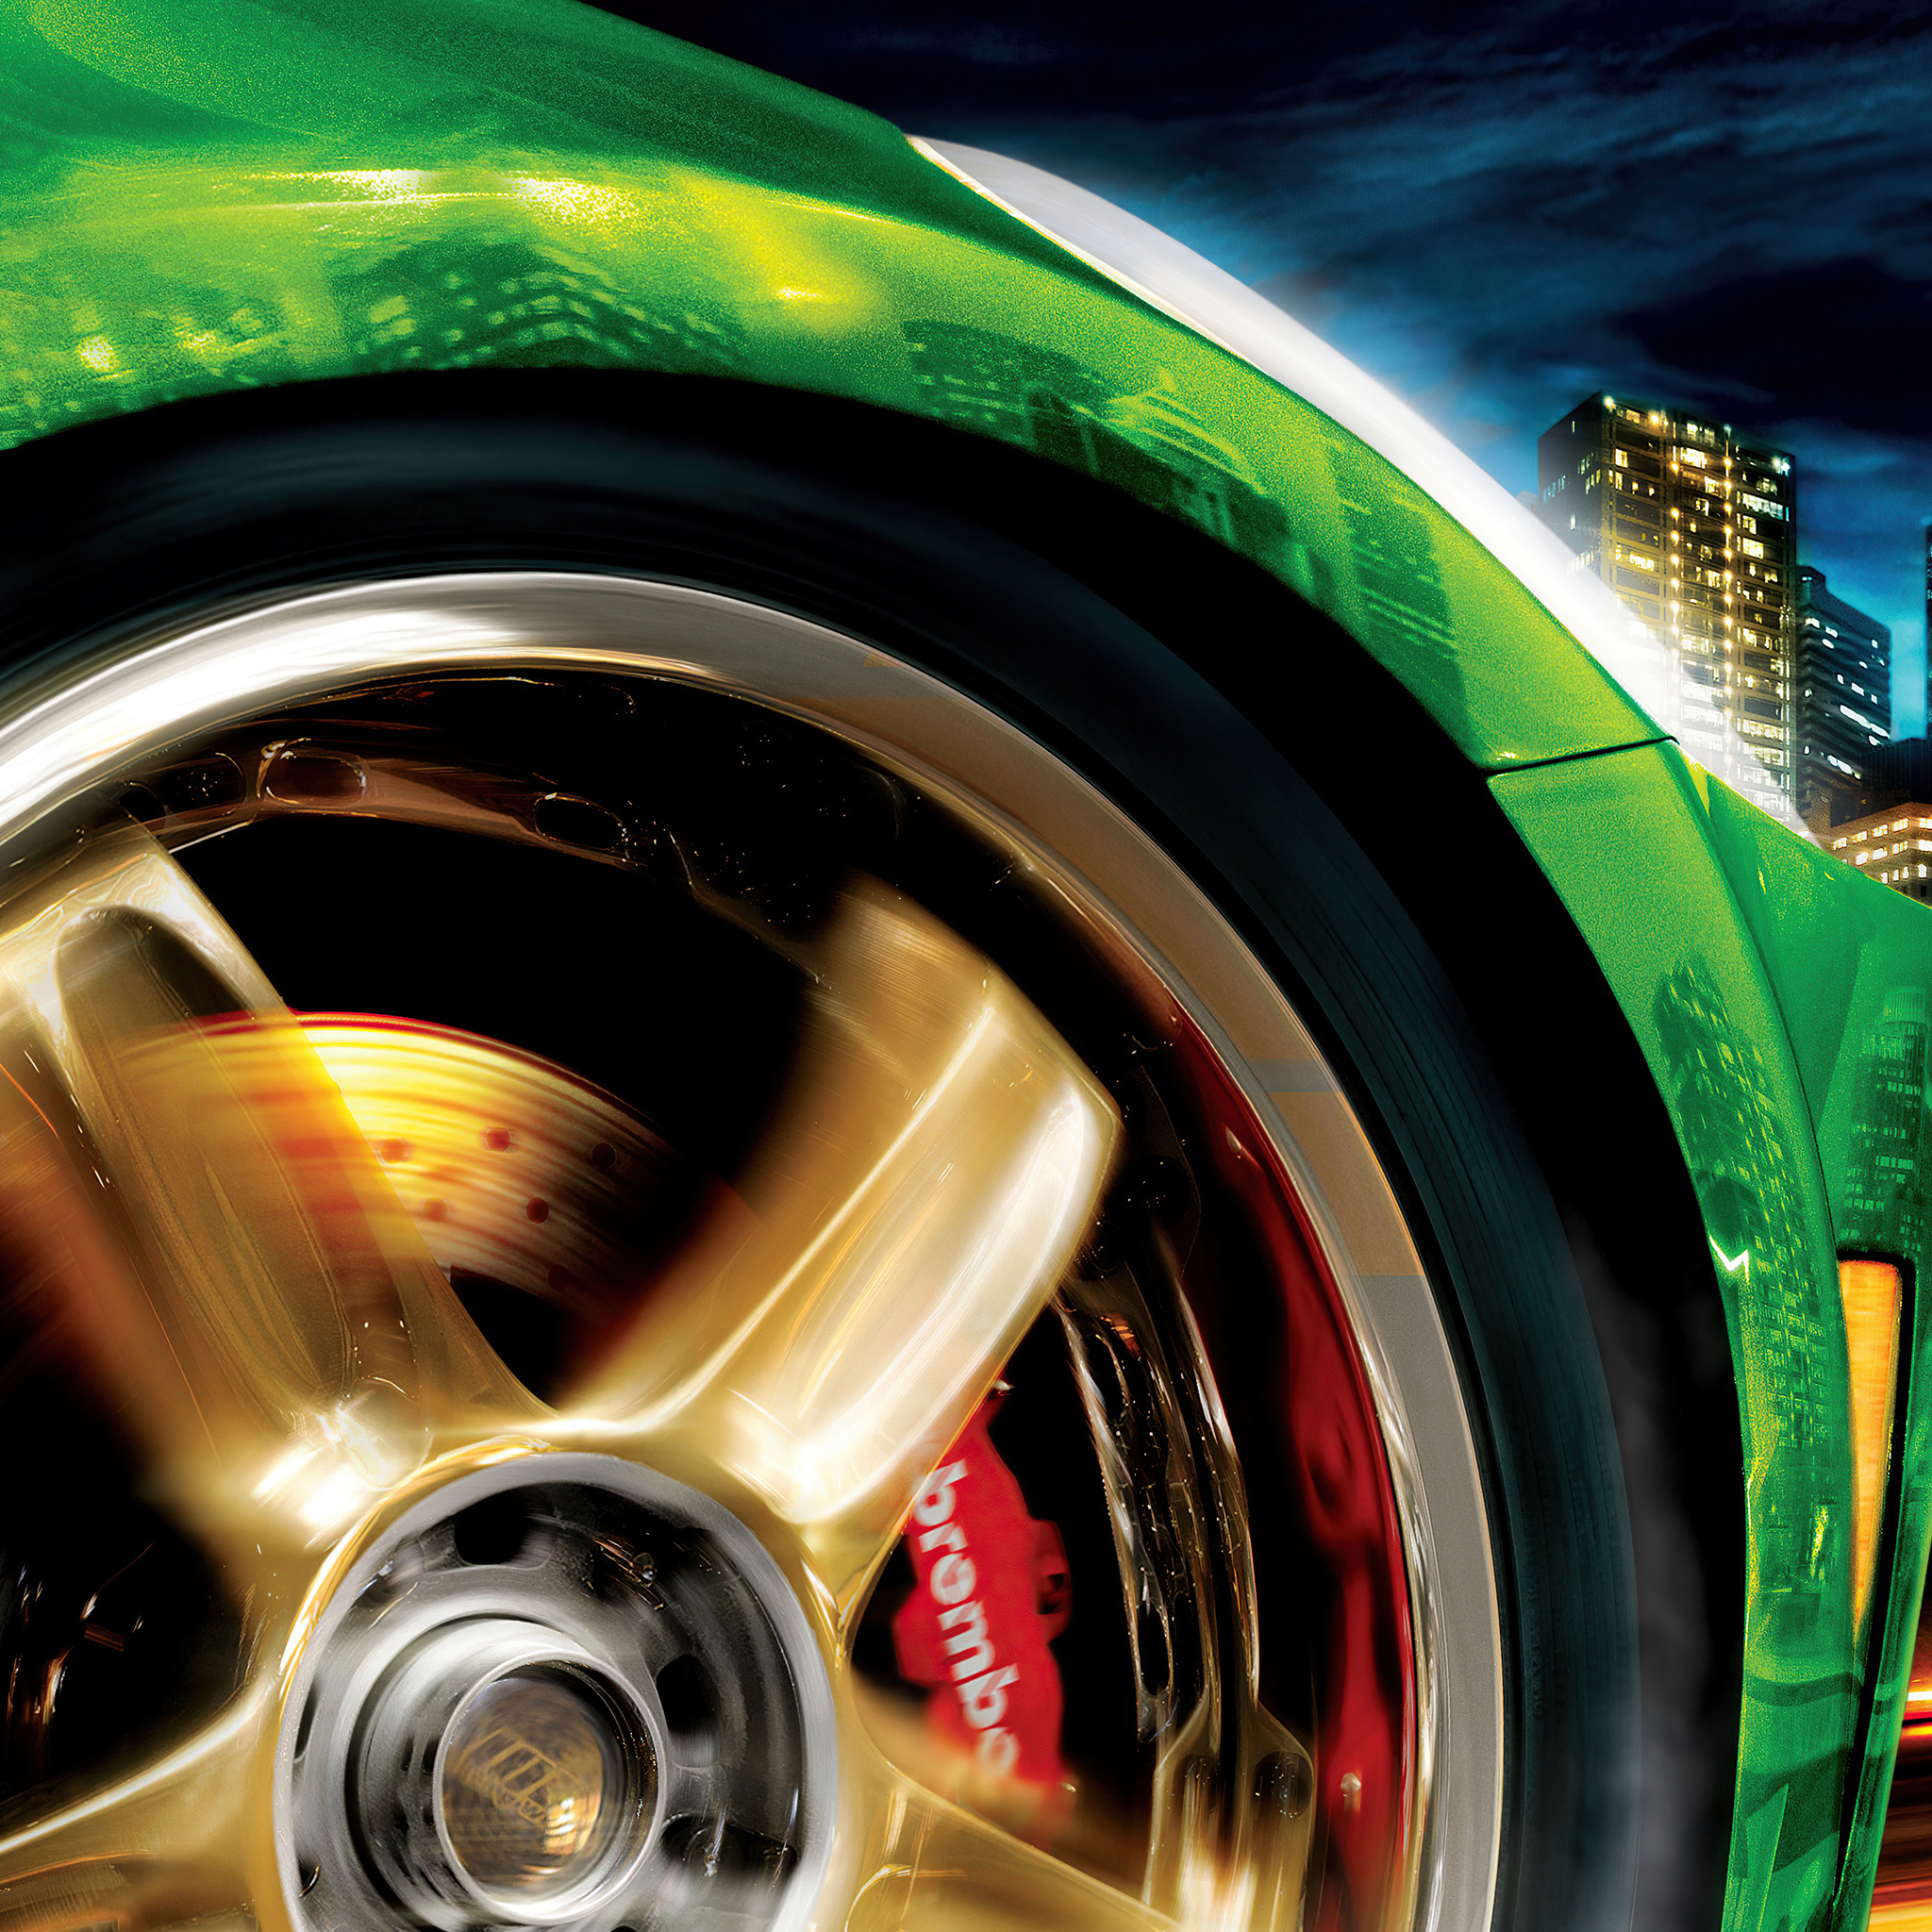 Need For Speed Underground 2 Wallpapers